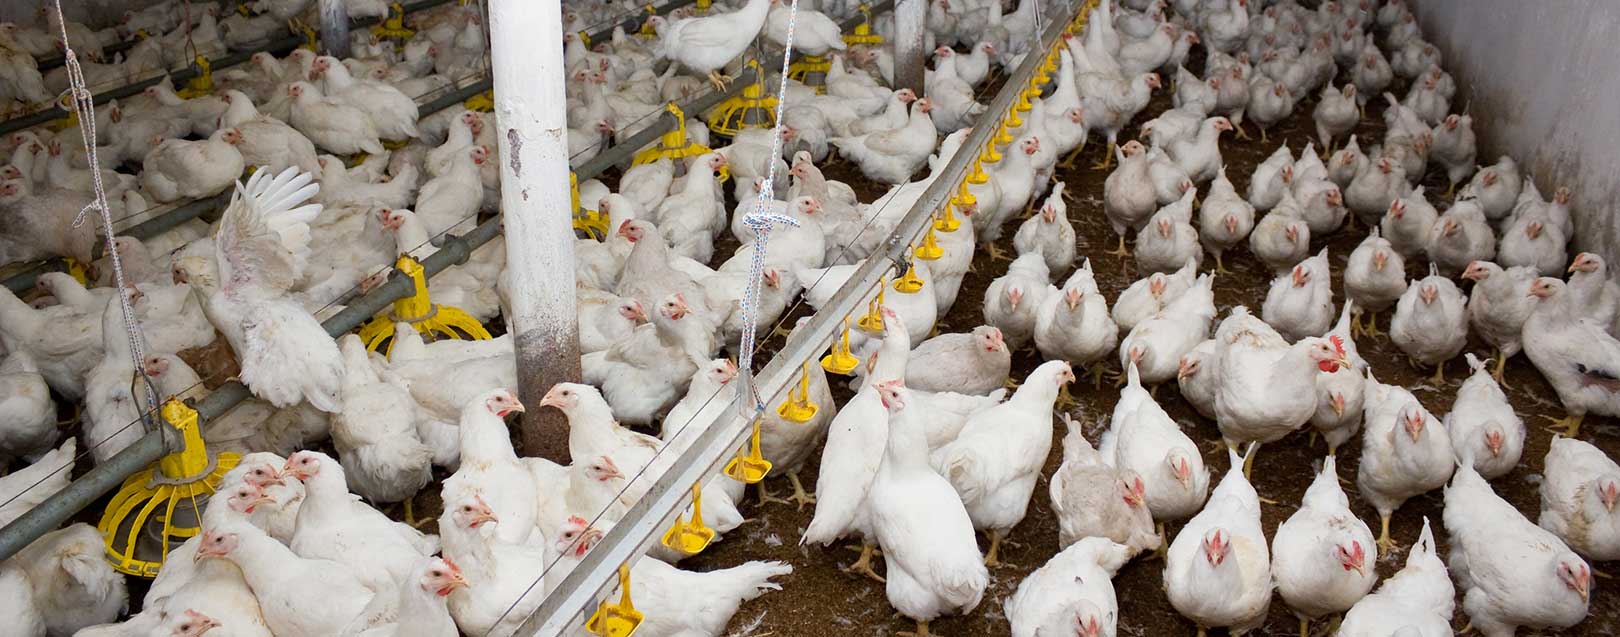 Saudi Arabia bans Indian poultry products